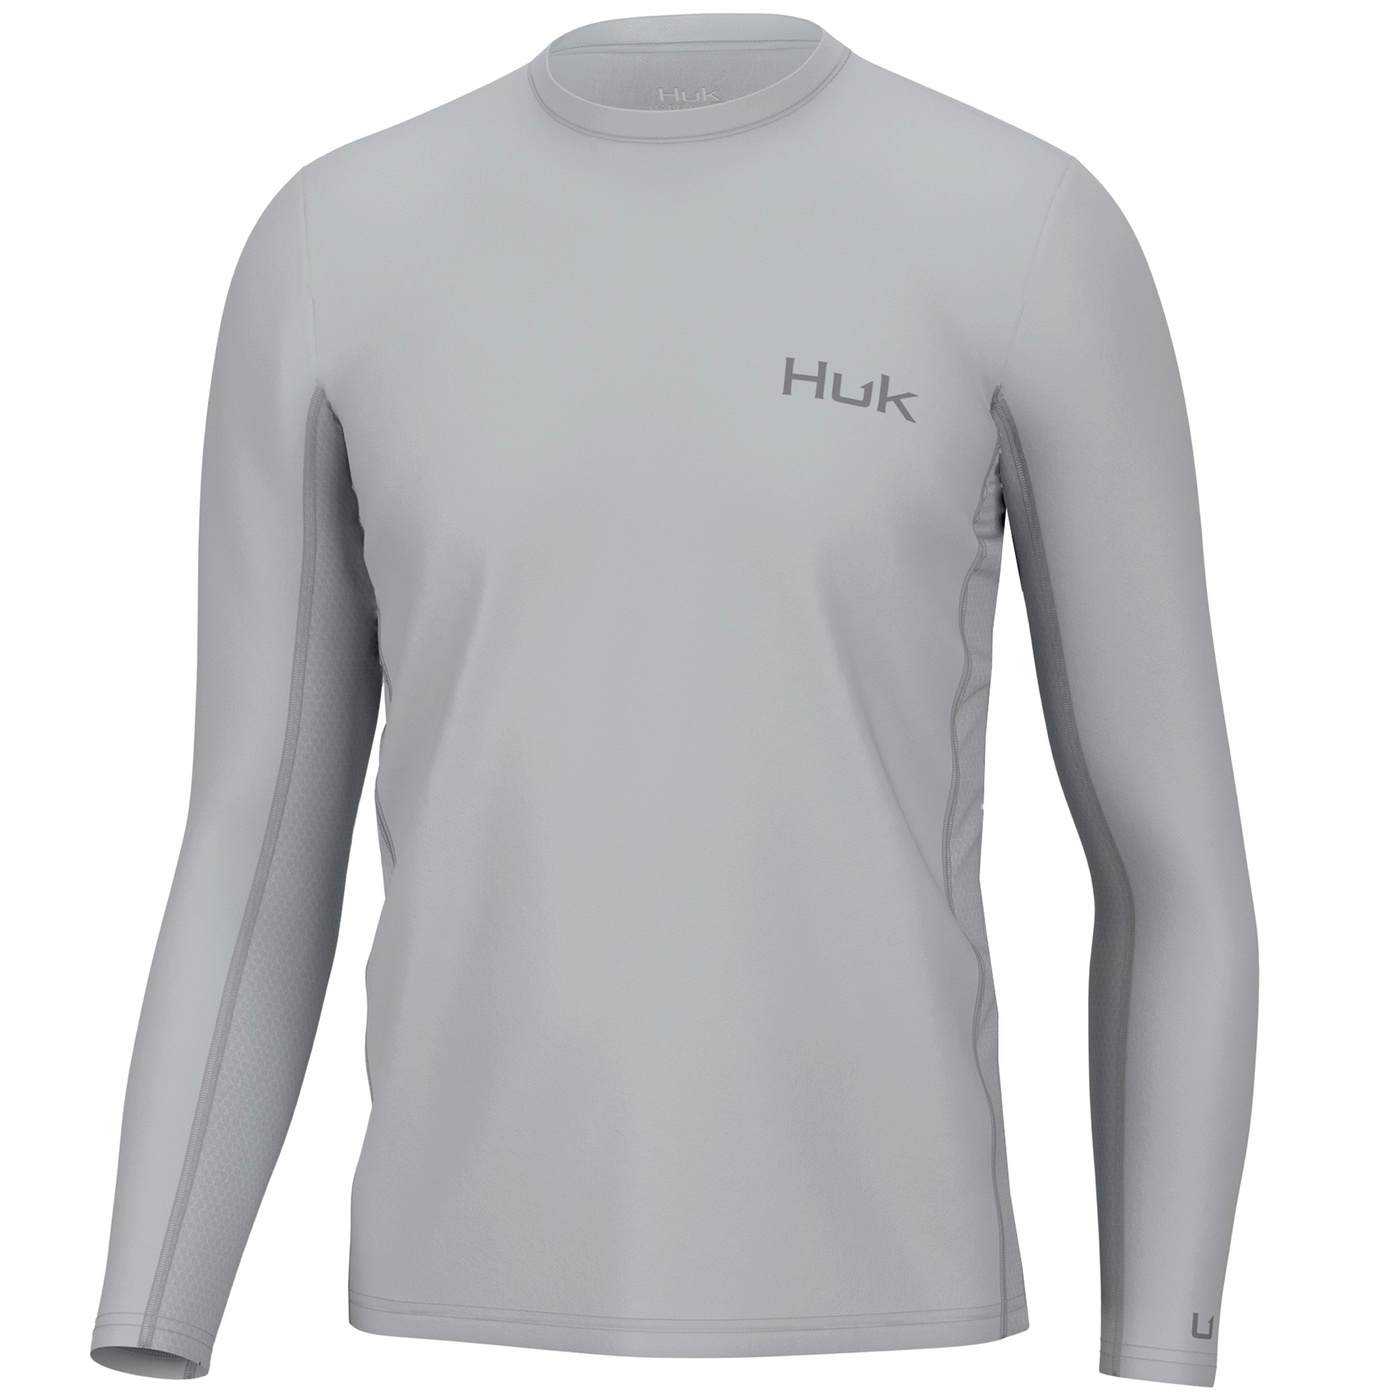 Huk Tall Leaves Pursuit Long-Sleeve Shirt for Ladies - Barely Pink - XL